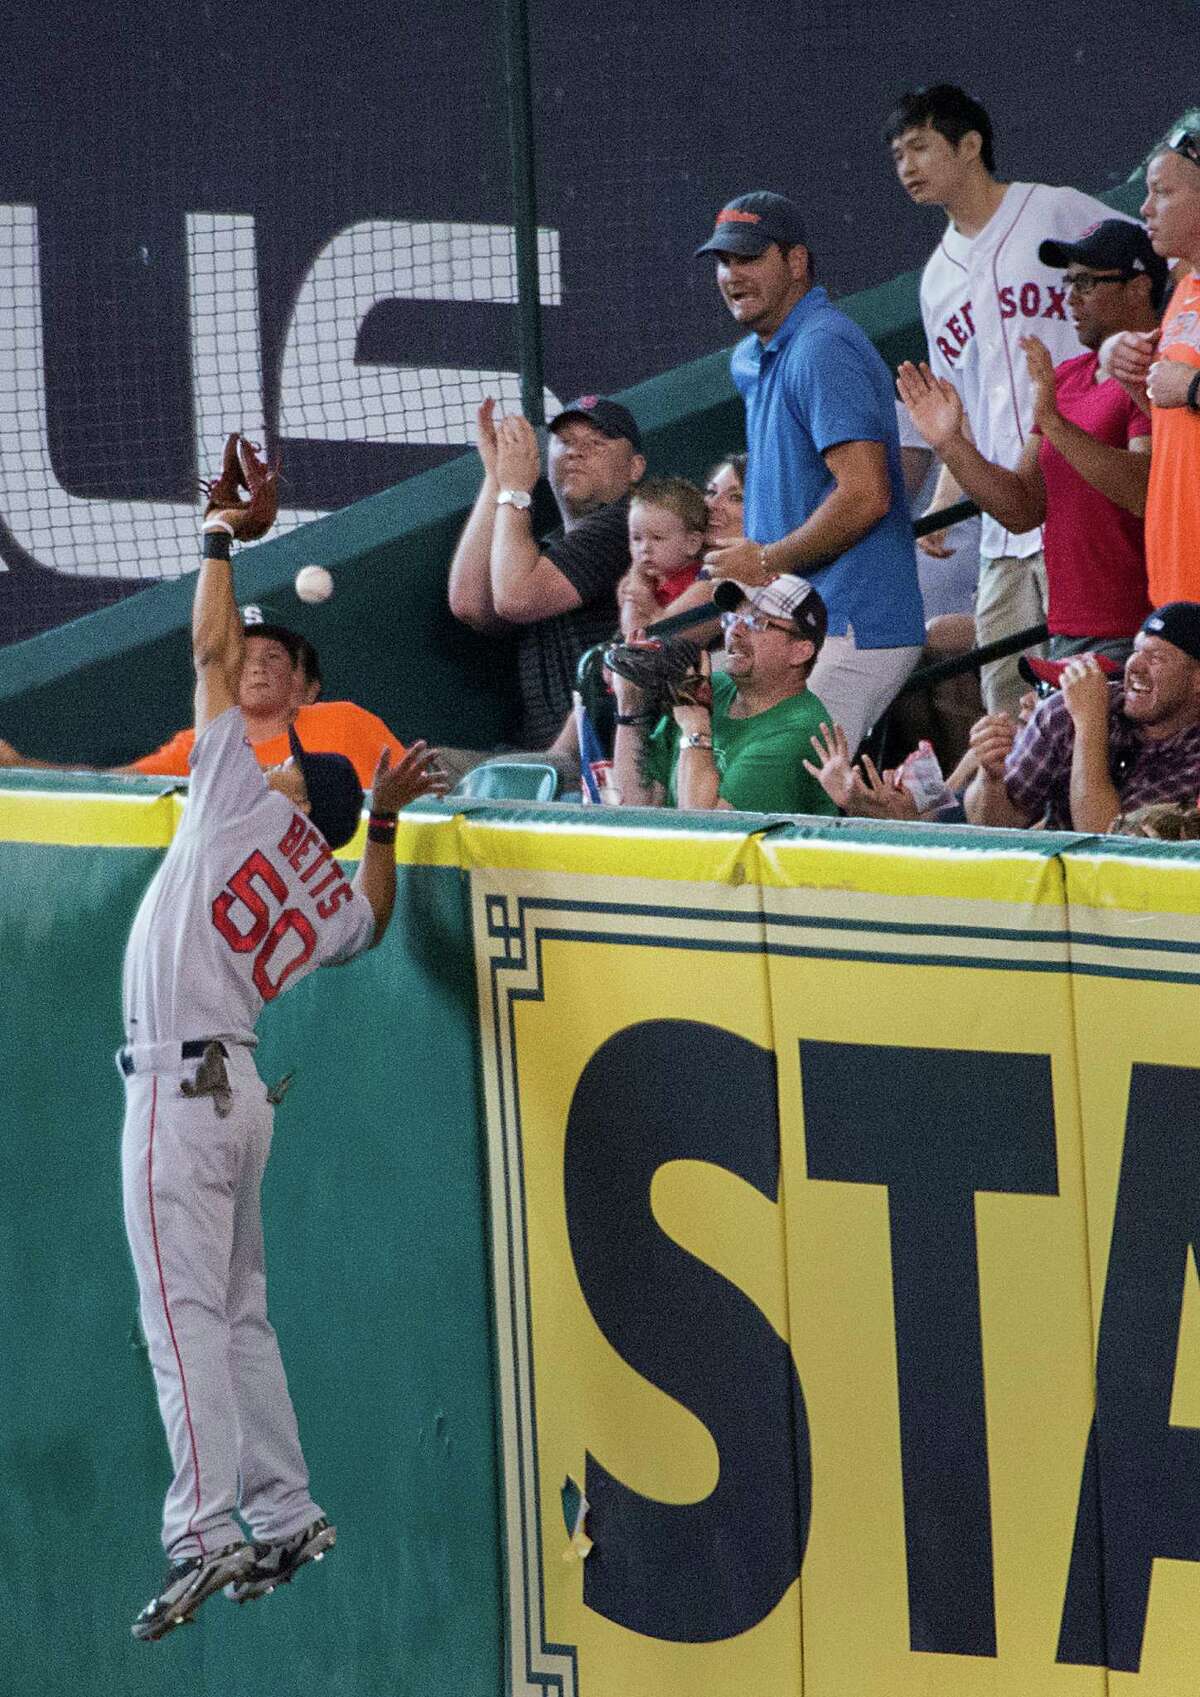 Red Sox right fielder Mookie Betts (50) makes a bid to deny the Astros' Jason Castro a home run in the third inning. But Betts comes up empty-handed, much to the fans' delight Saturday at Minute Maid Park.